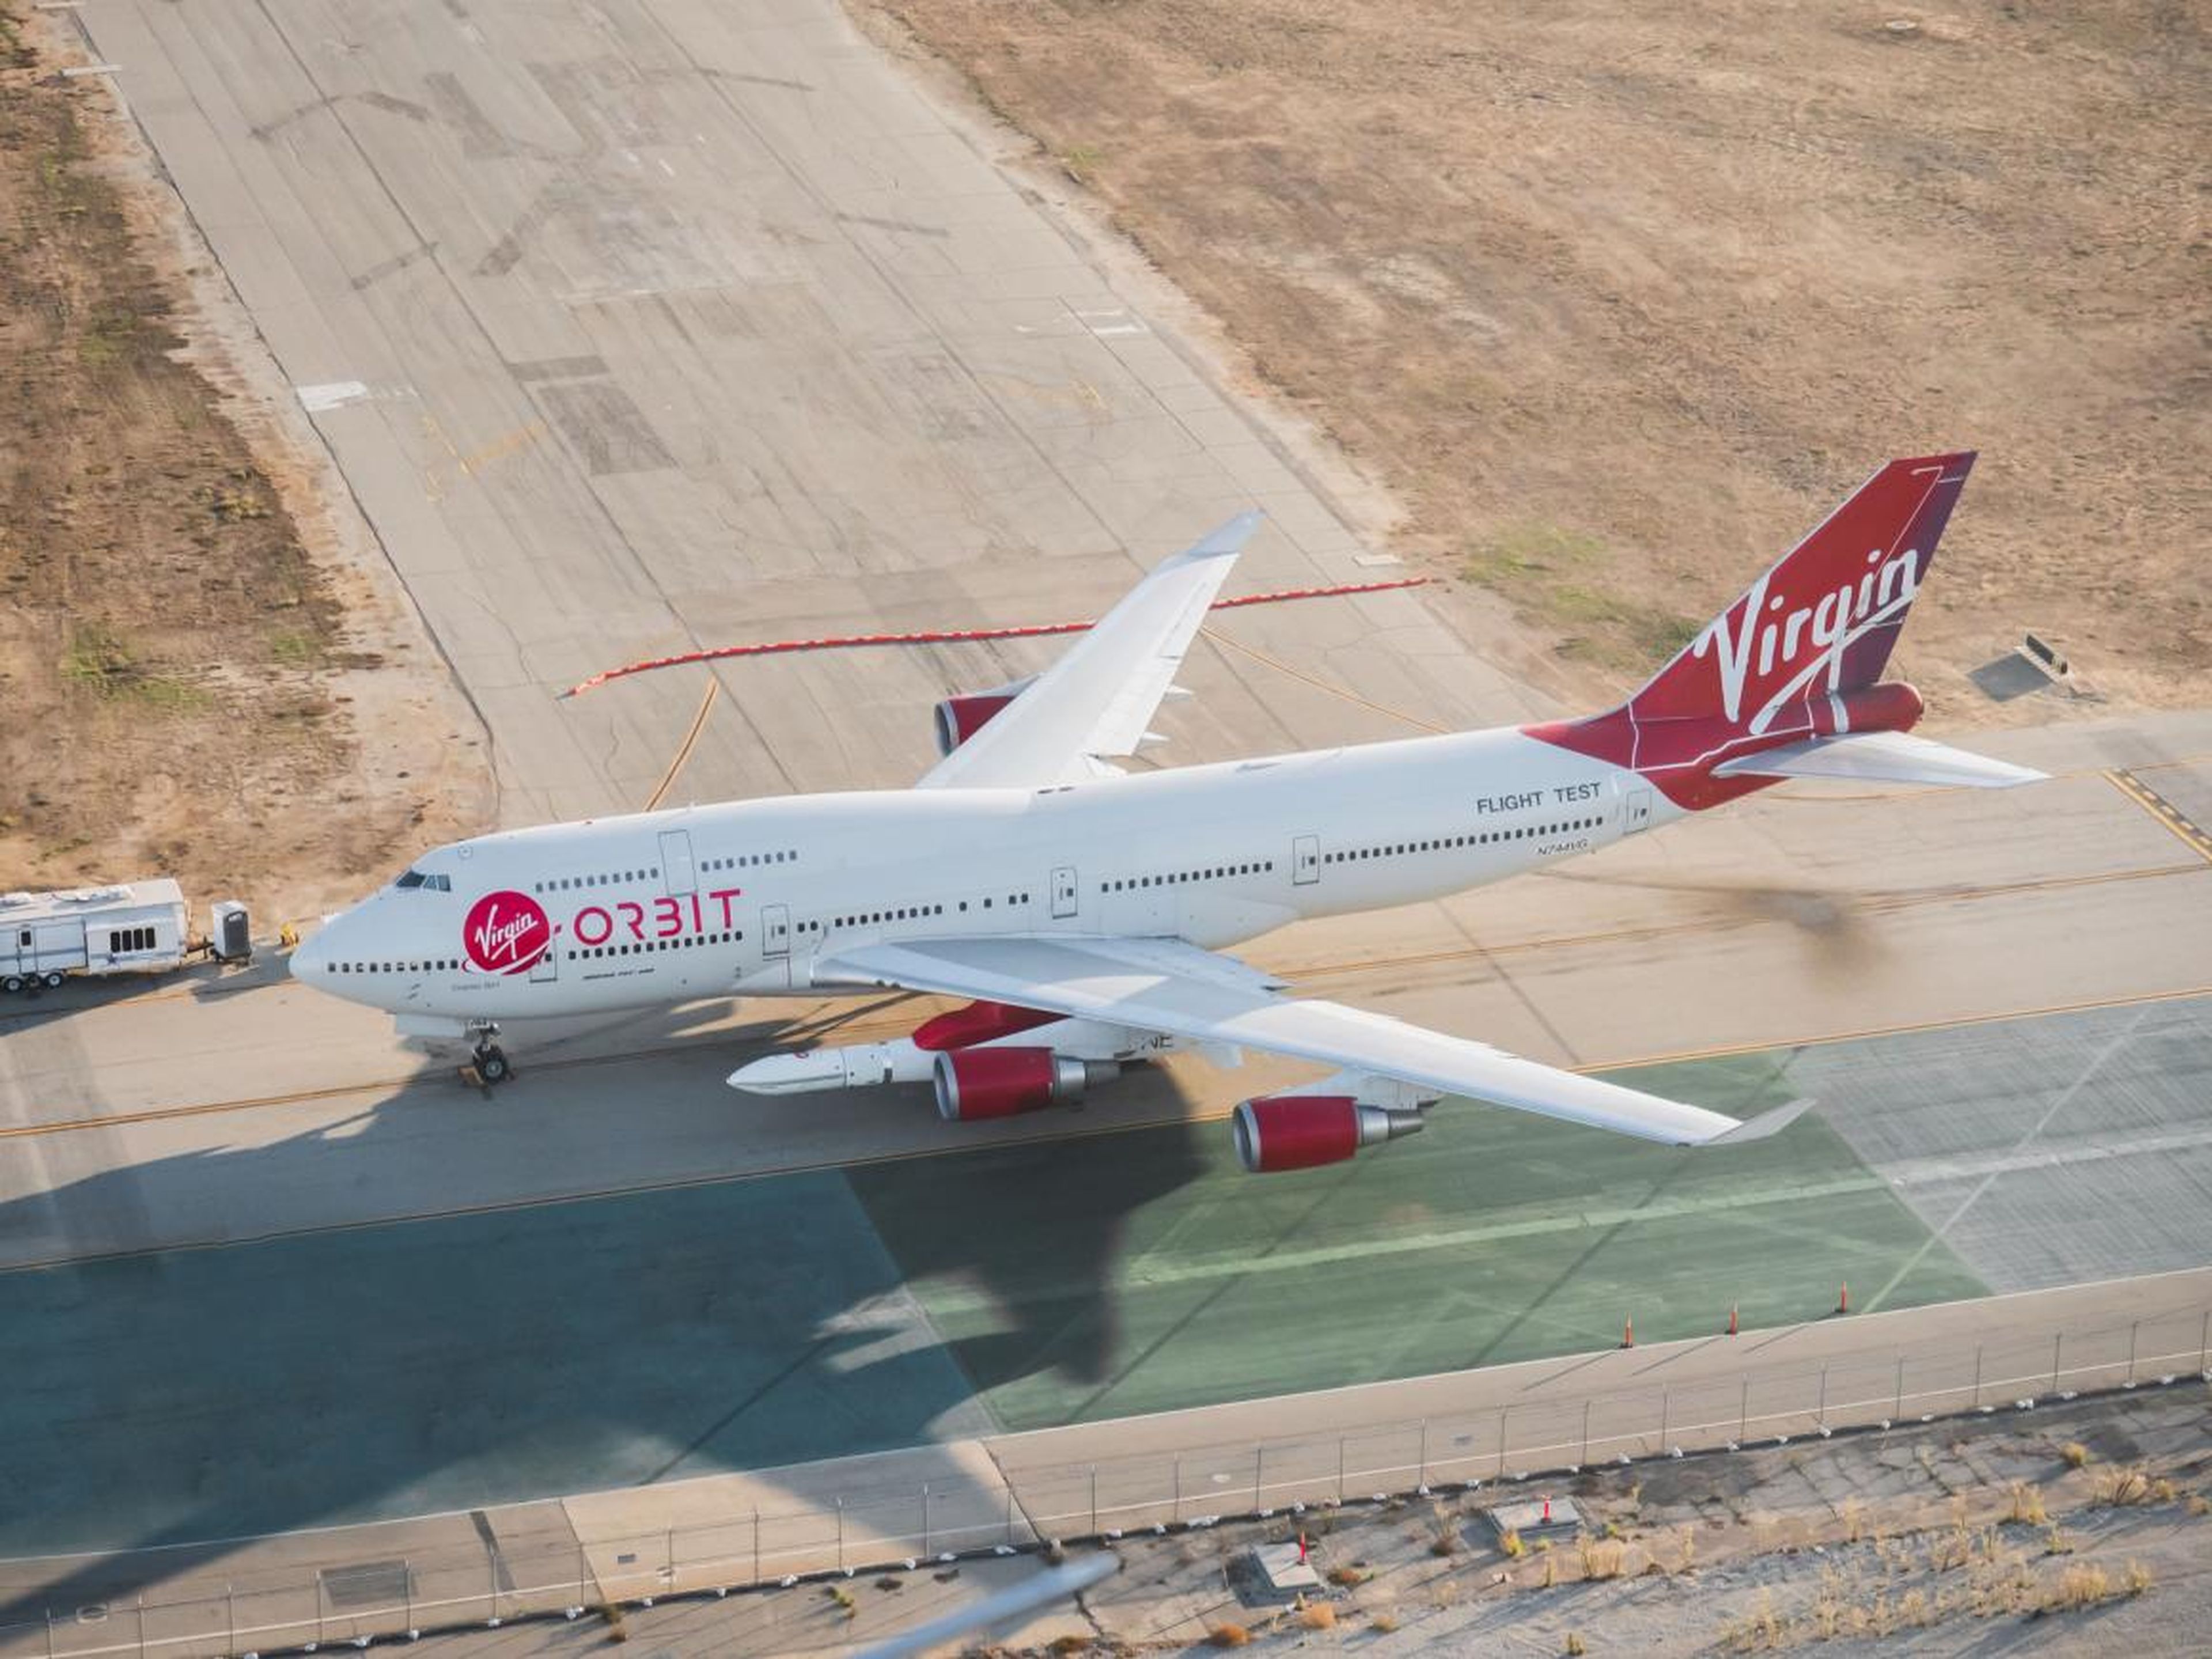 "The company already has hundreds of millions of dollars of launches on contract, for customers ranging from NASA and the US Department of Defense to new start-ups, and everything in between," Virgin Orbit said in a press release.